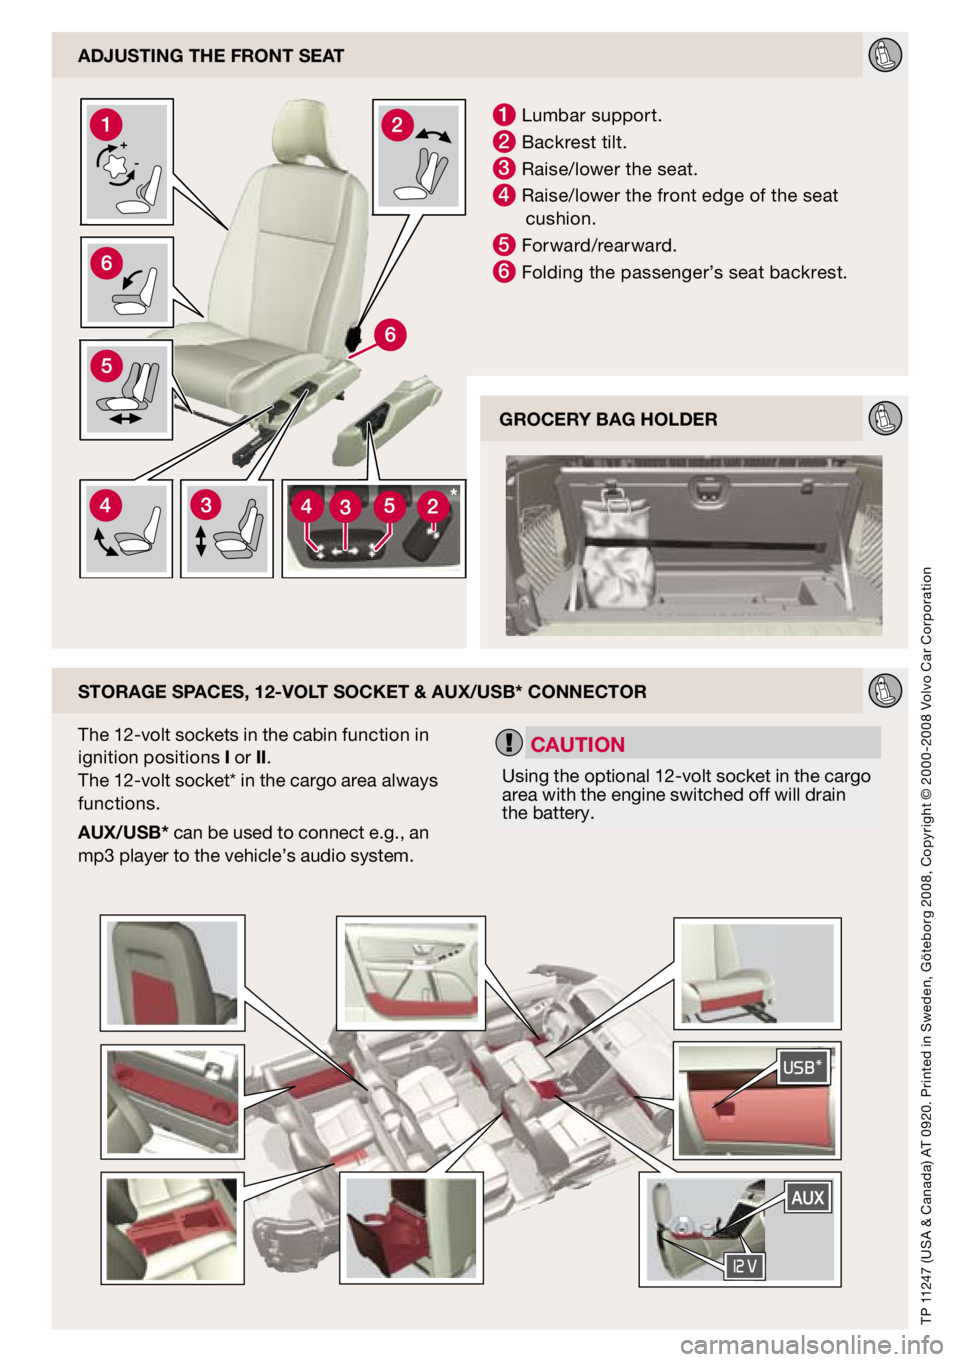 VOLVO XC90 2010  Quick Guide 
adjUsting the Front seat
storage spaces, 12-volt socket & aUX/Usb* connector
1 Lumbar support.
2 Backrest tilt.
3 Raise/lower the seat.
4 Raise/lower the front edge of the seat cushion.
5 Forward/rea